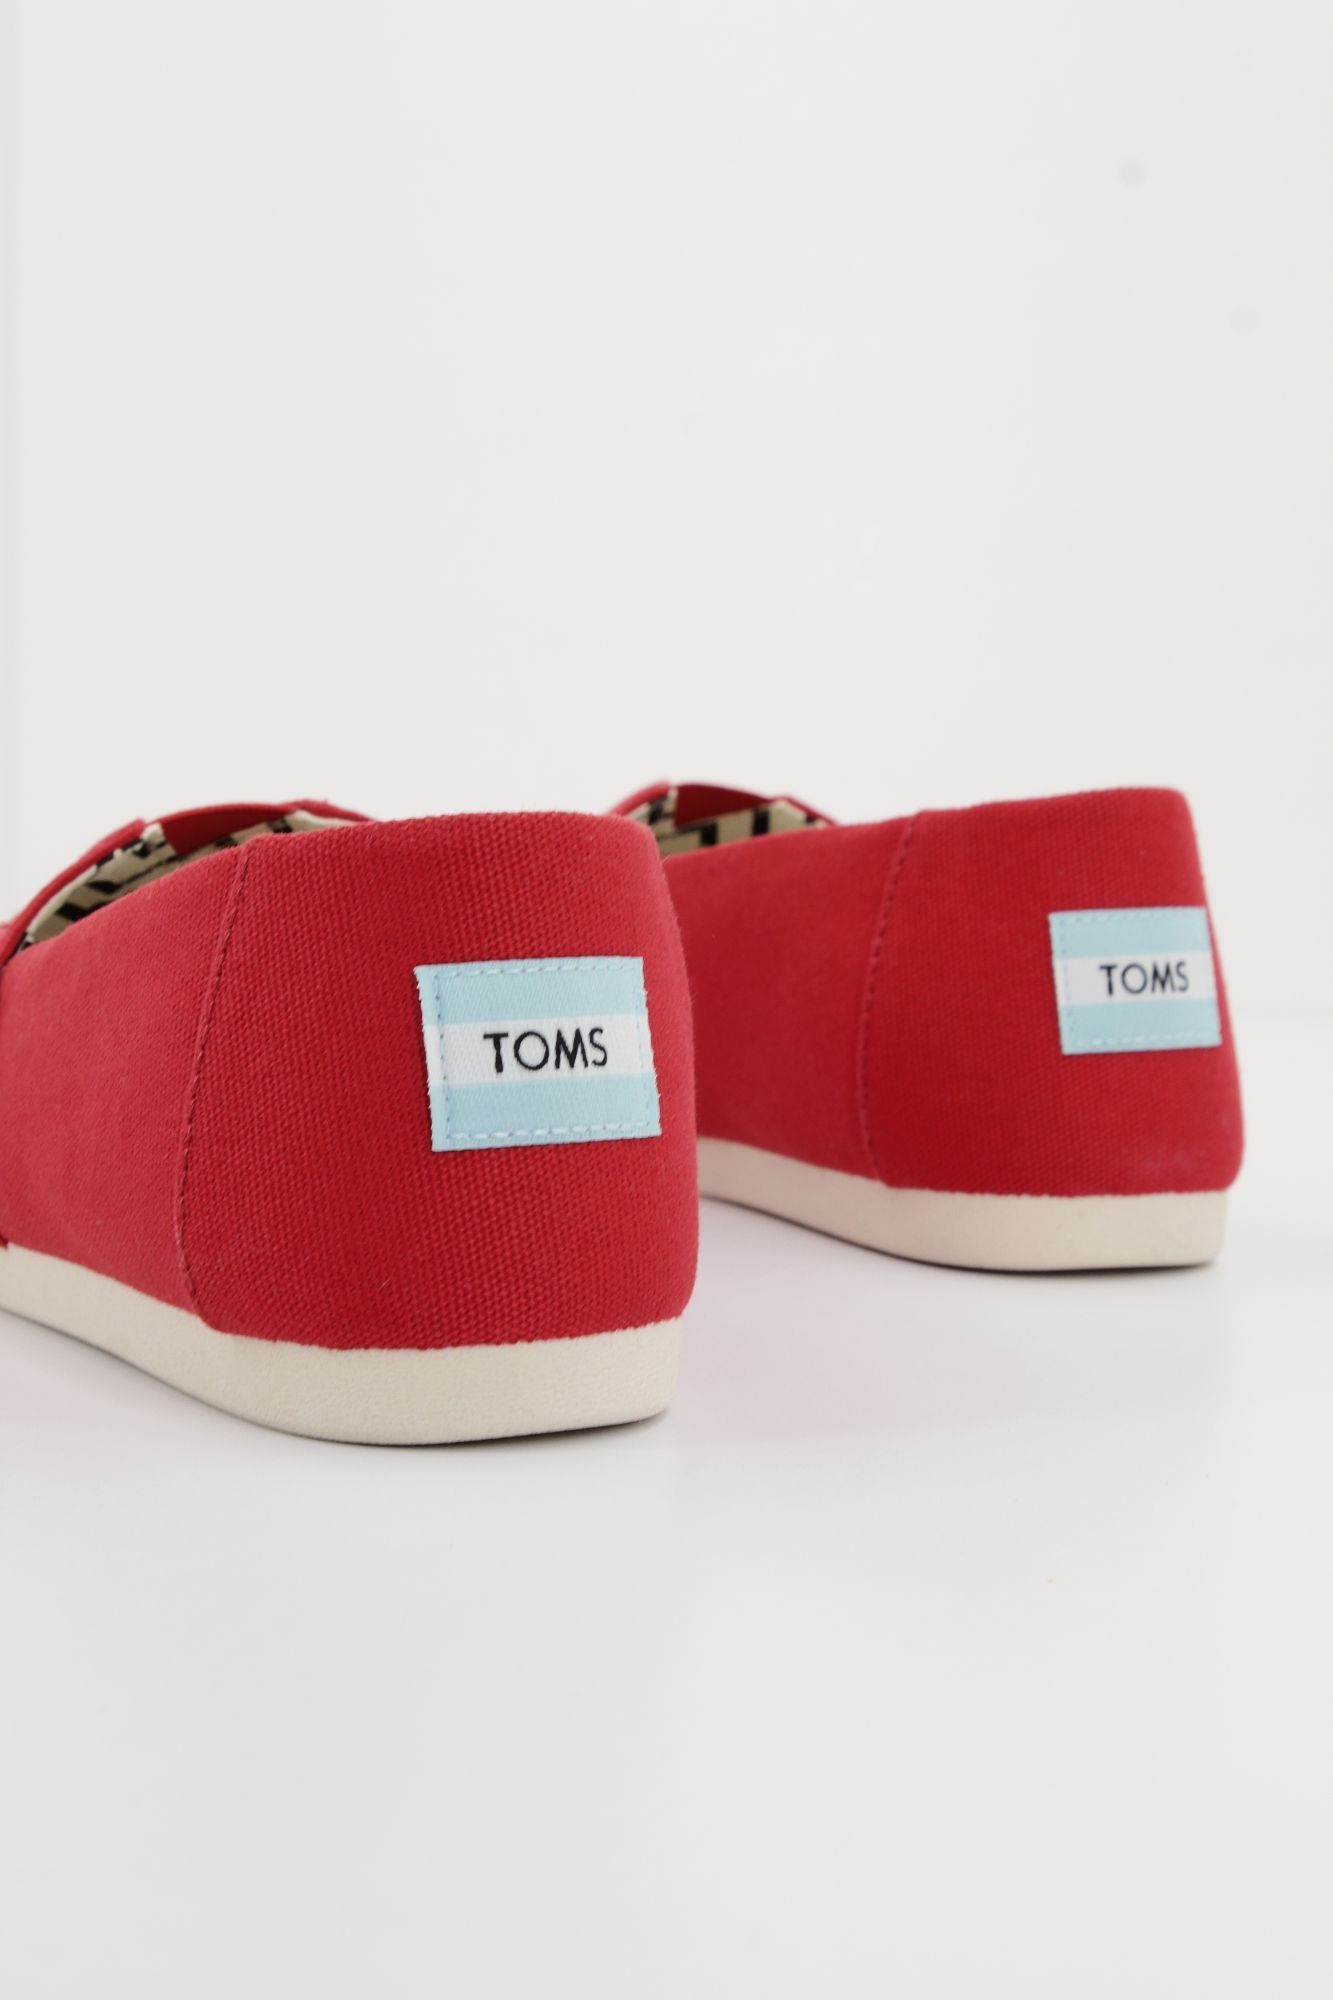 TOMS RED RECYCLED COTTON CANVAS en color ROJO (3)